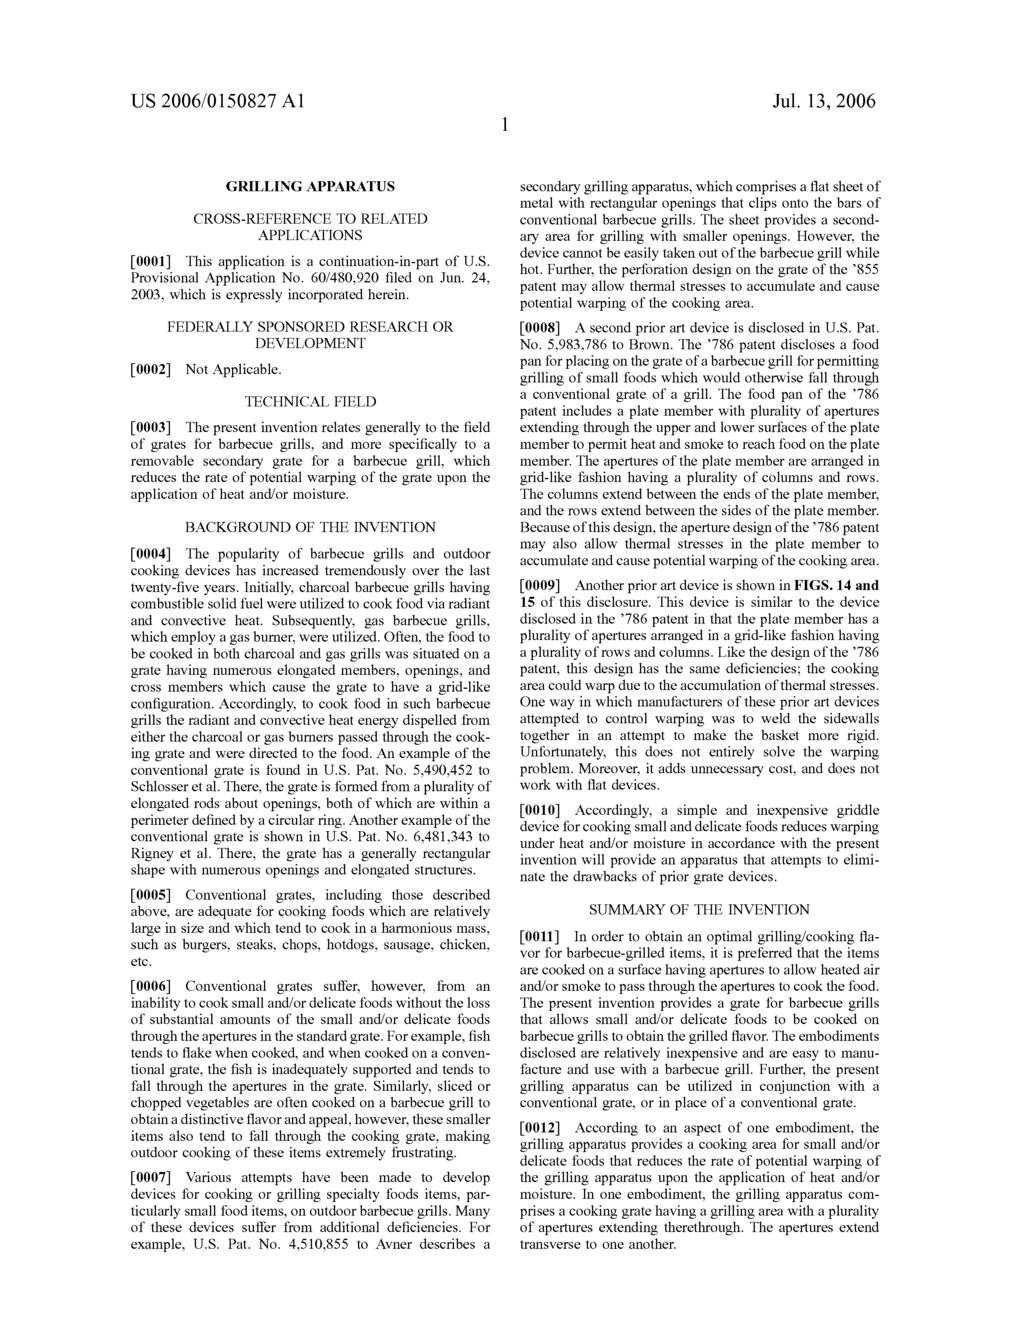 US 2006/O 150827 A1 Jul. 13, 2006 GRILLINGAPPARATUS CROSS-REFERENCE TO RELATED APPLICATIONS 0001. This application is a continuation-in-part of U.S. Provisional Application No.